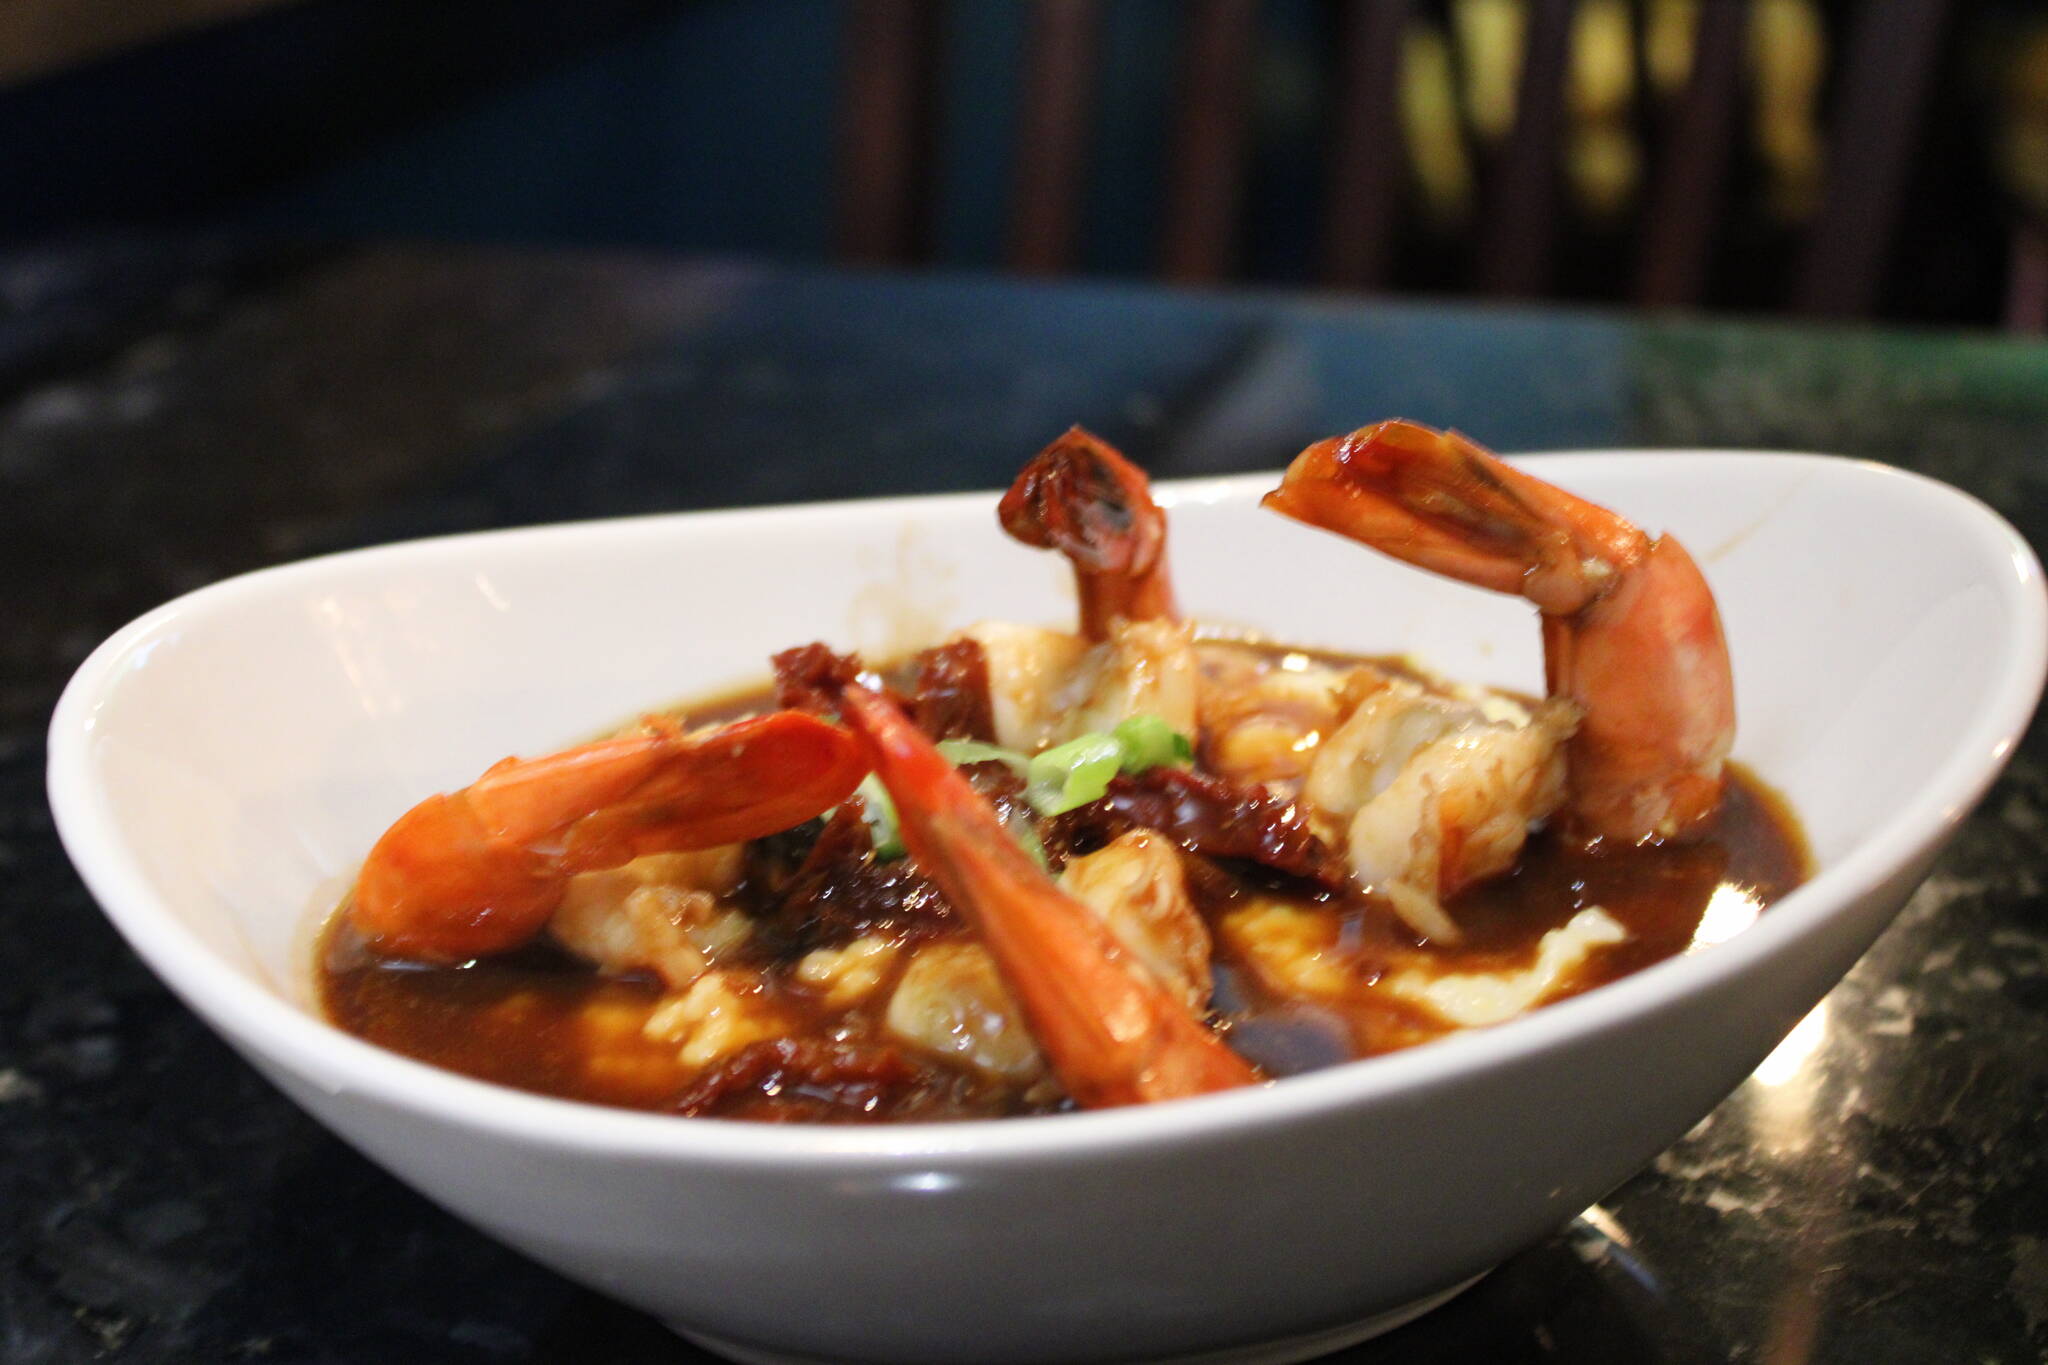 The gumbo with shrimp and crab featured, pictured here, includes expertly prepared shrimp that were bursting with flavor in a rich and well-flavored roux. (Dana Zigmund / Juneau Empire)